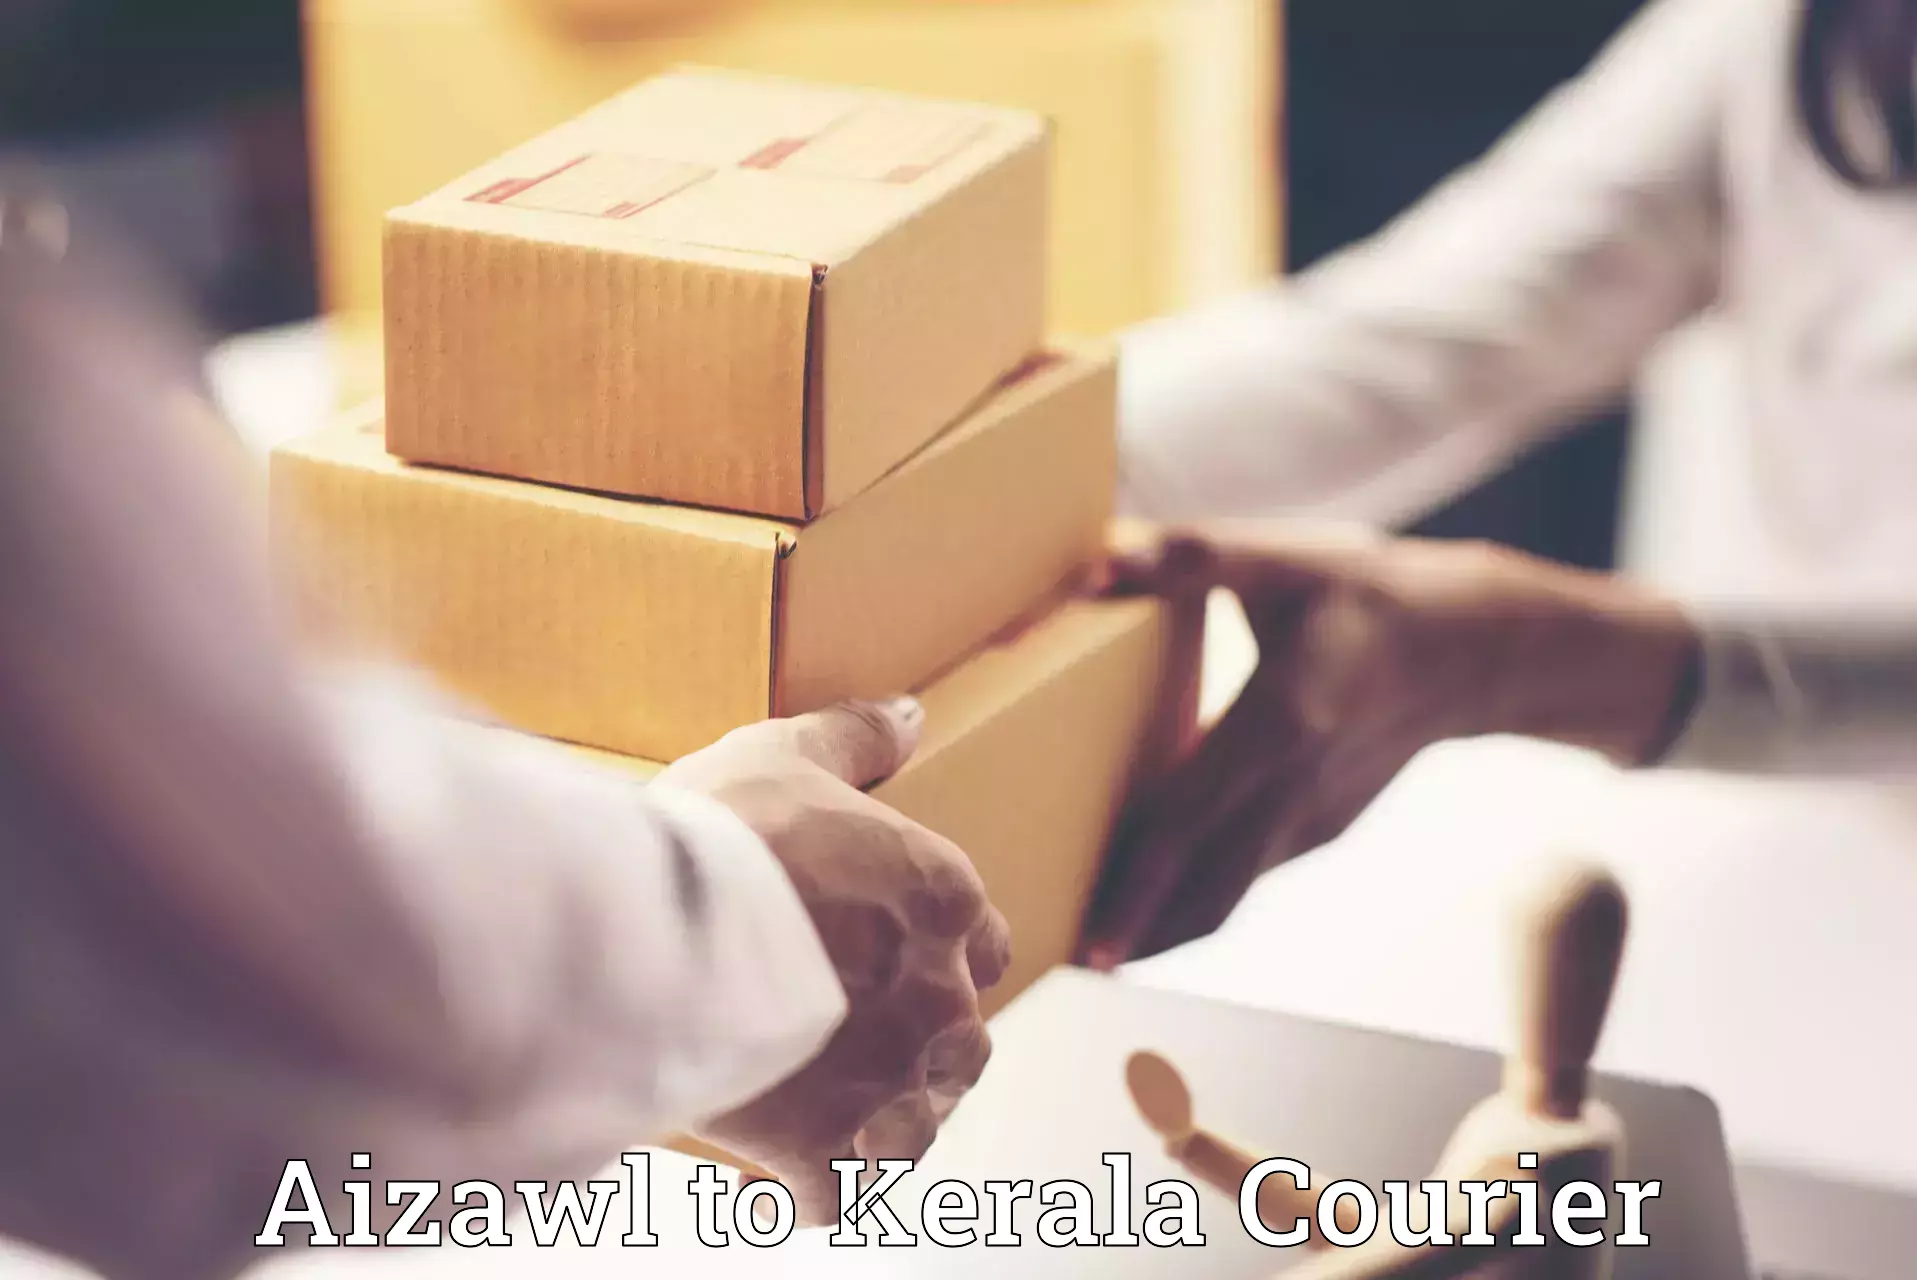 Hassle-free relocation Aizawl to Punalur